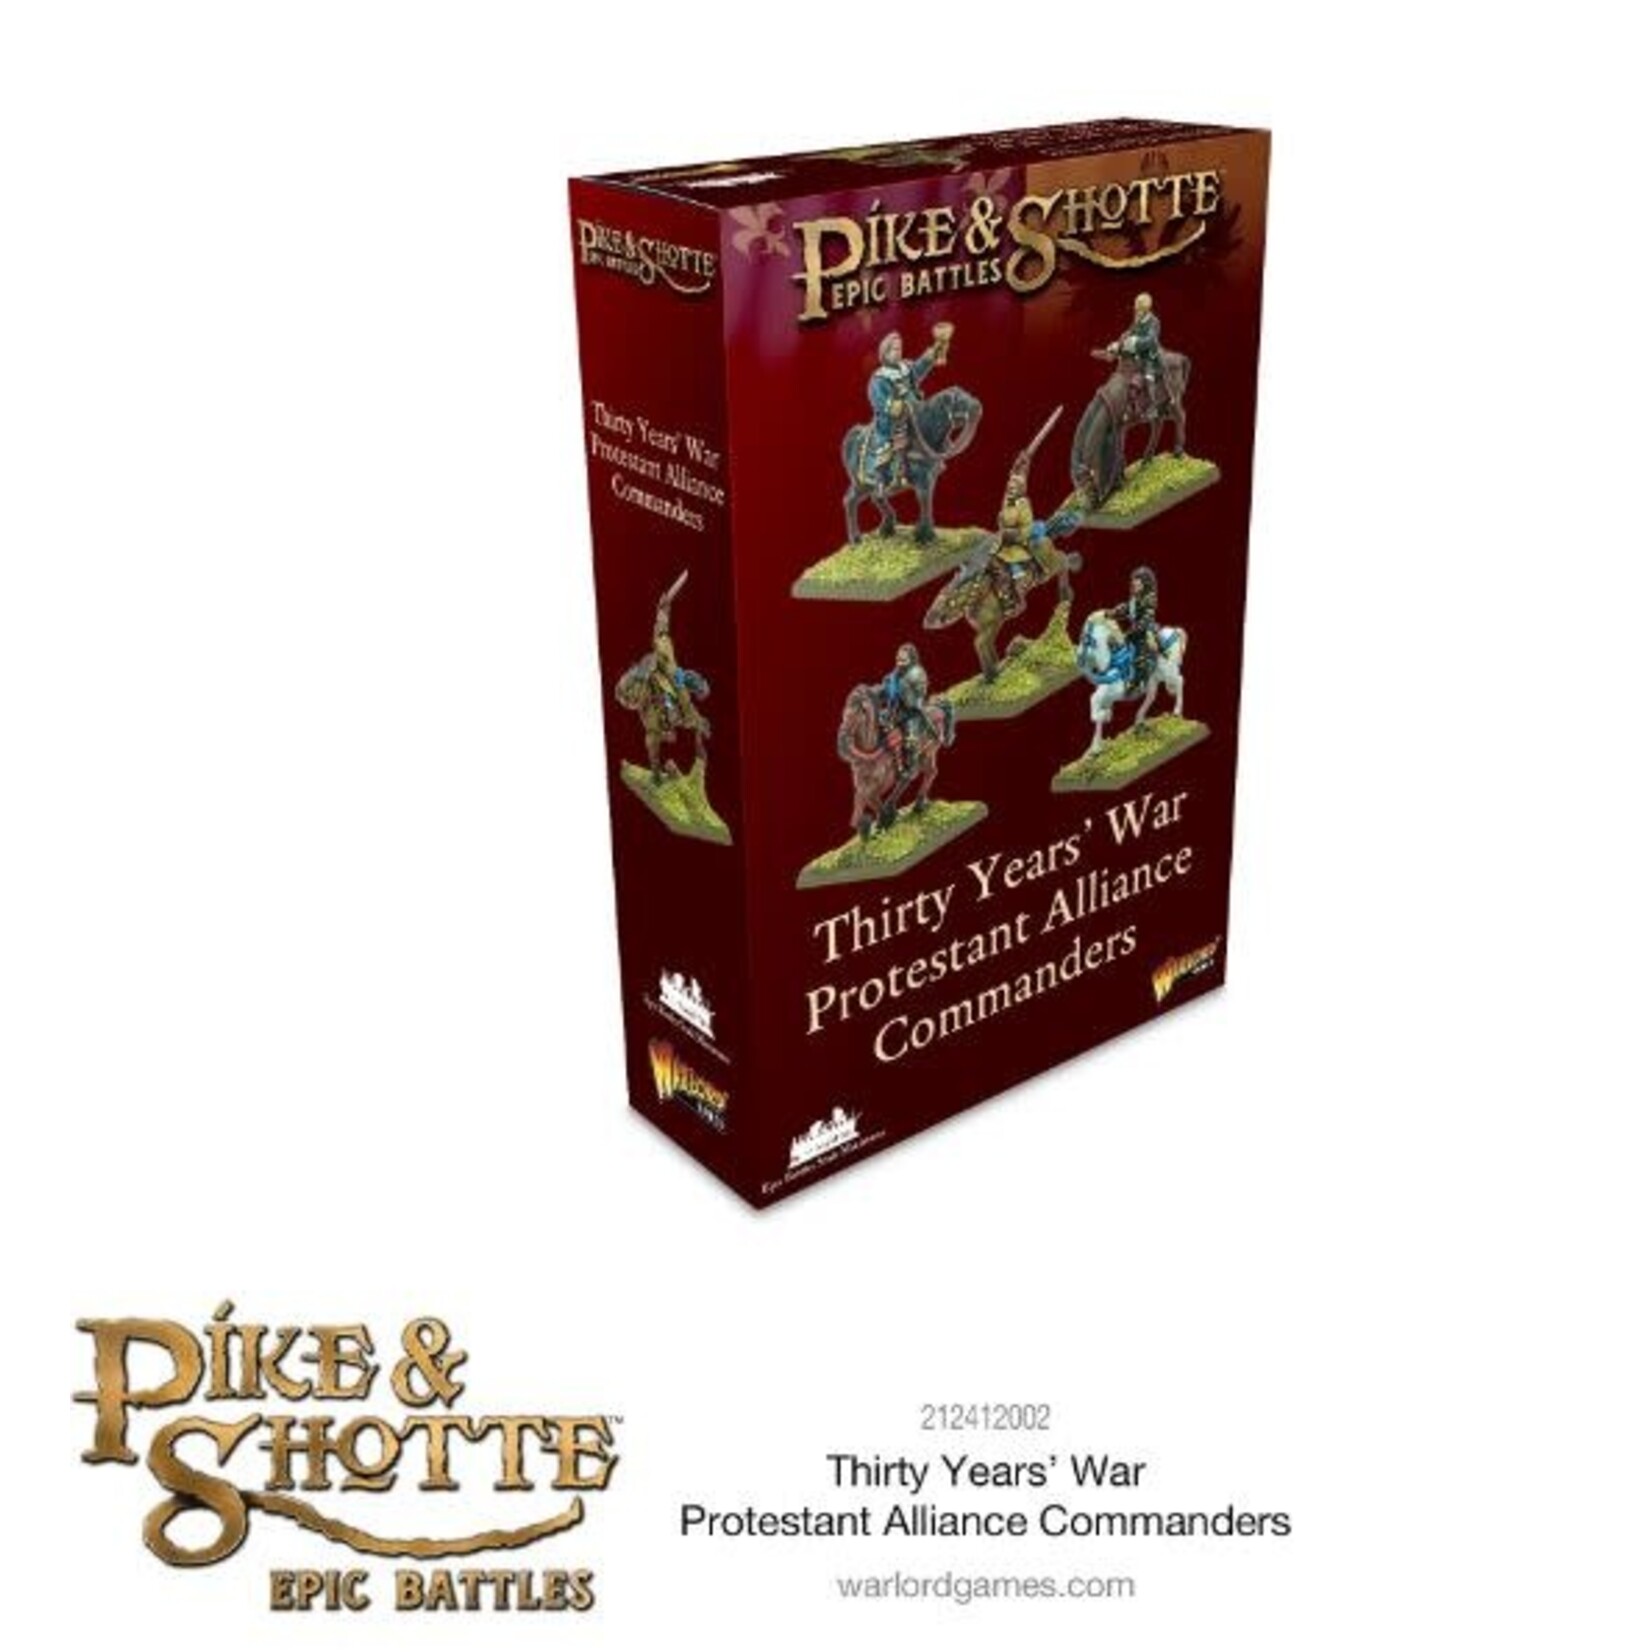 Warlord Games Pike & Shotte: Epic Battles: 30 Years War Protestant Alliance Commanders